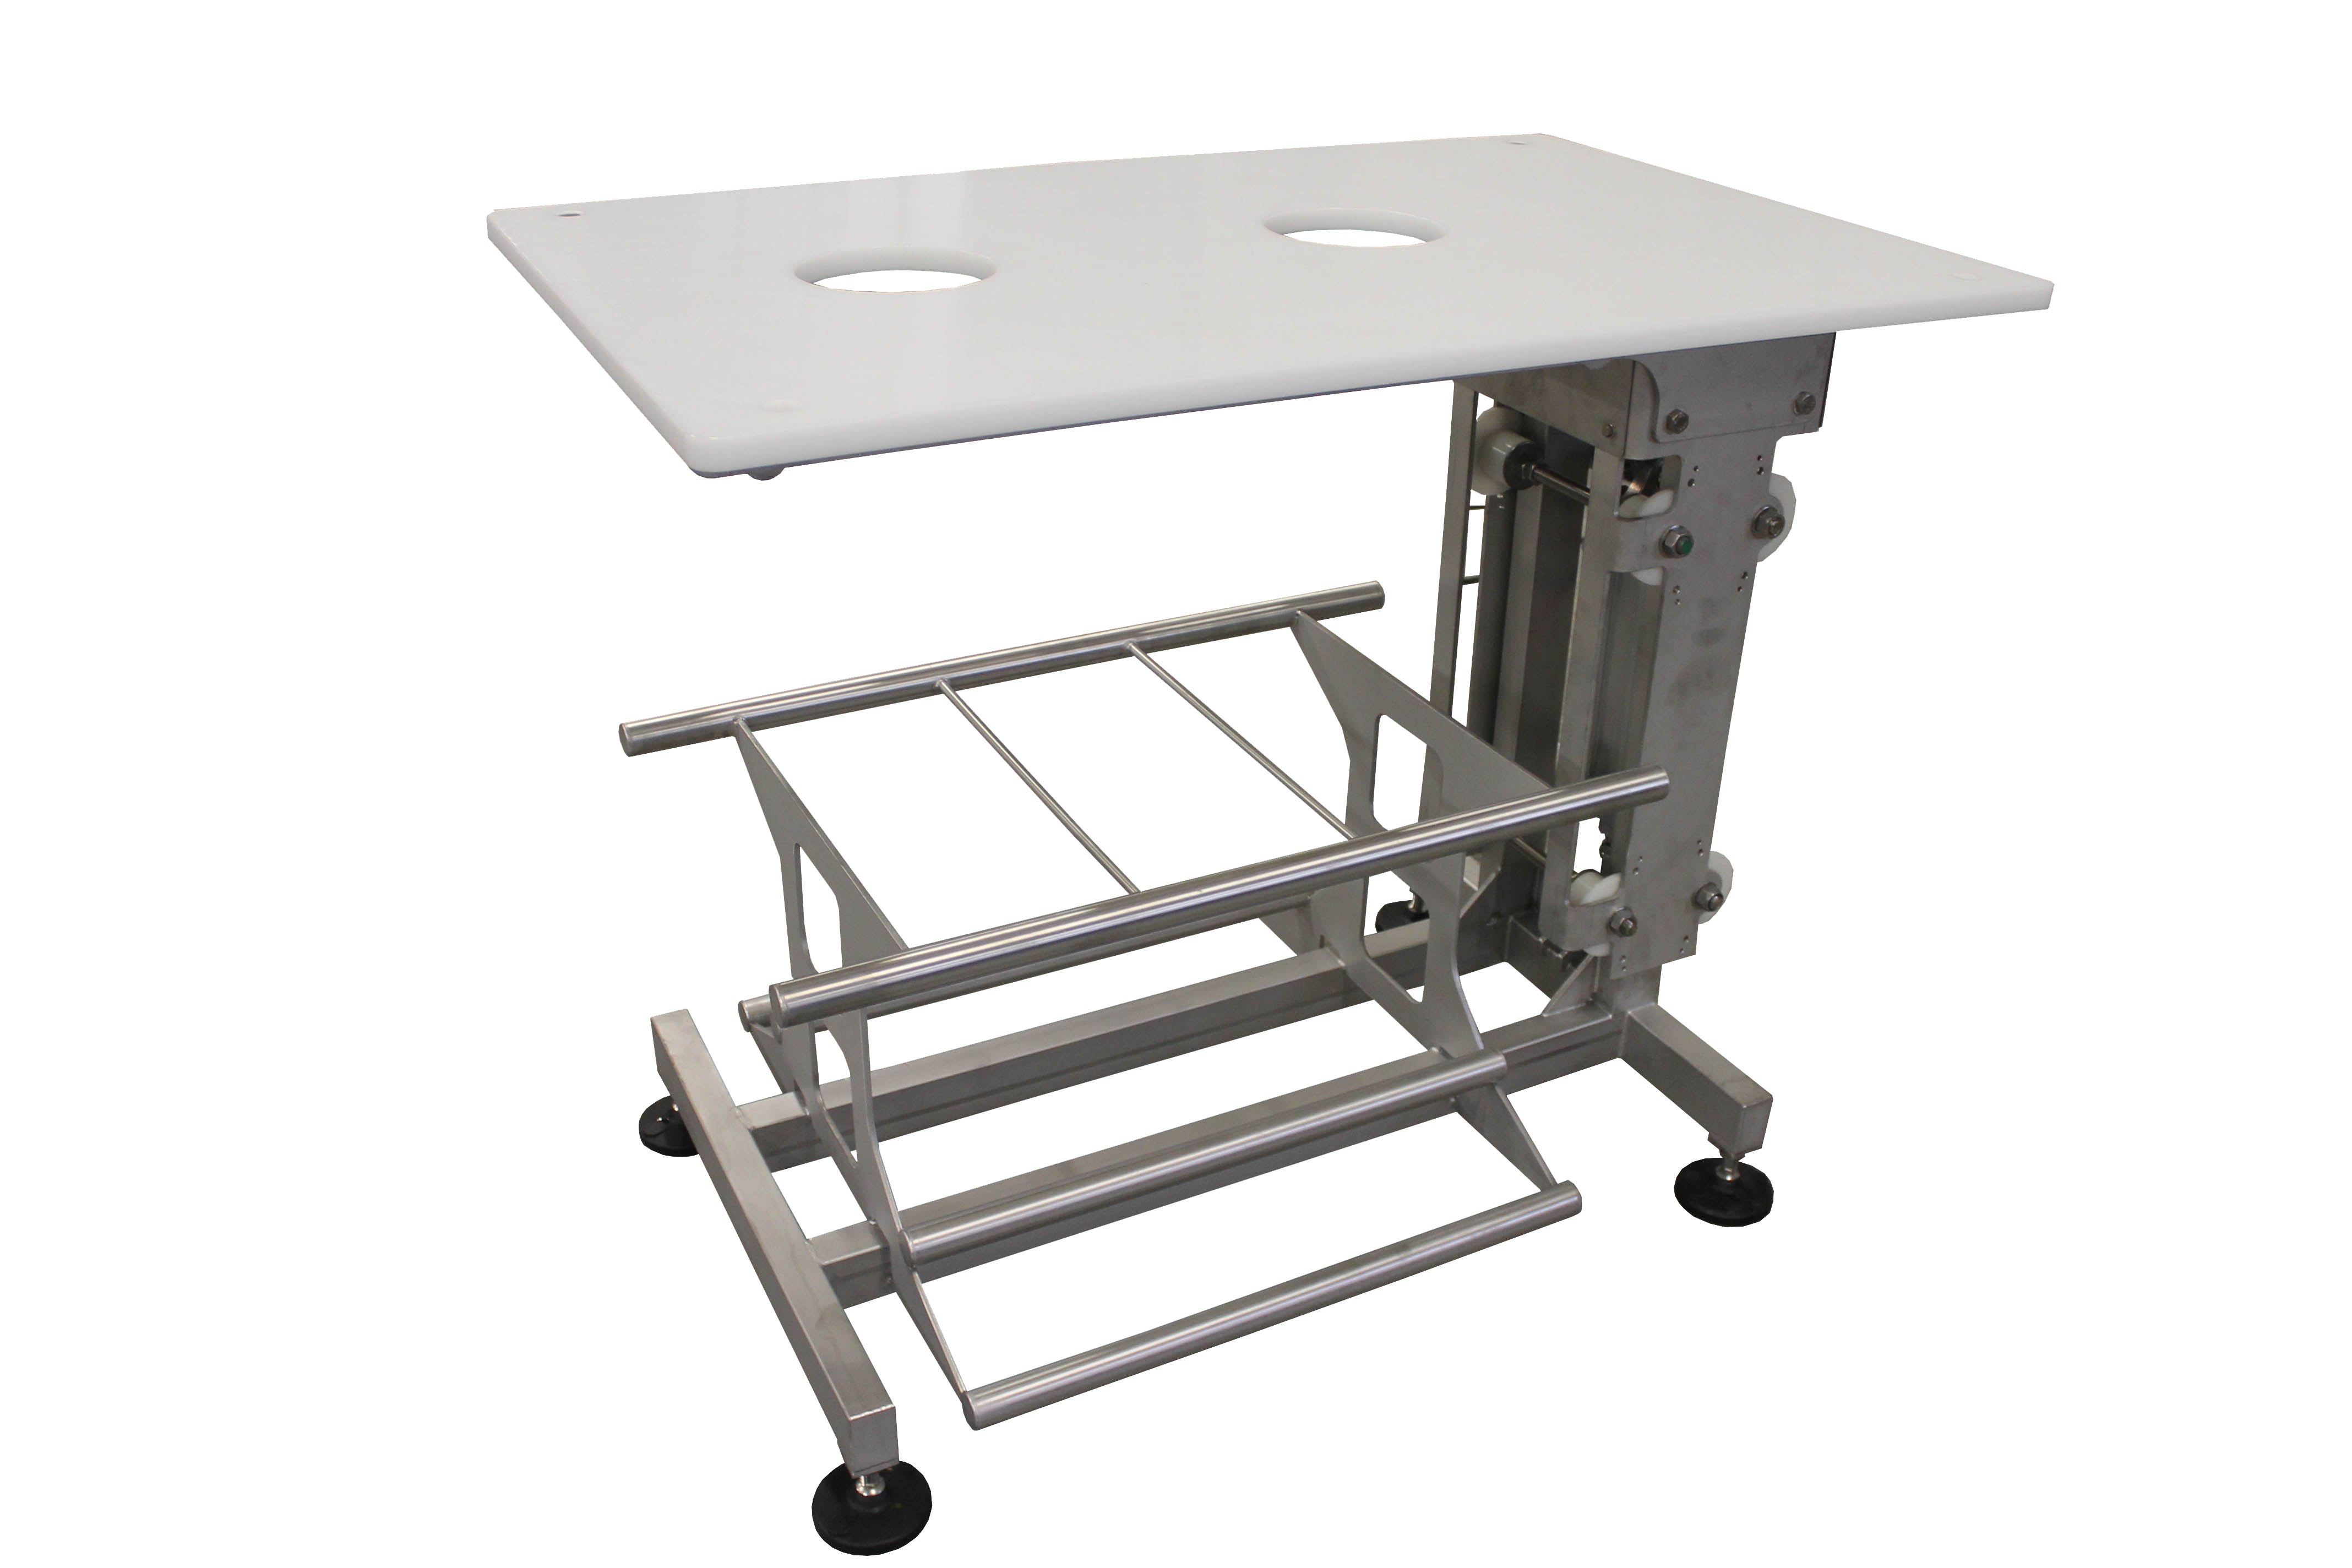 The stainless steel Work table